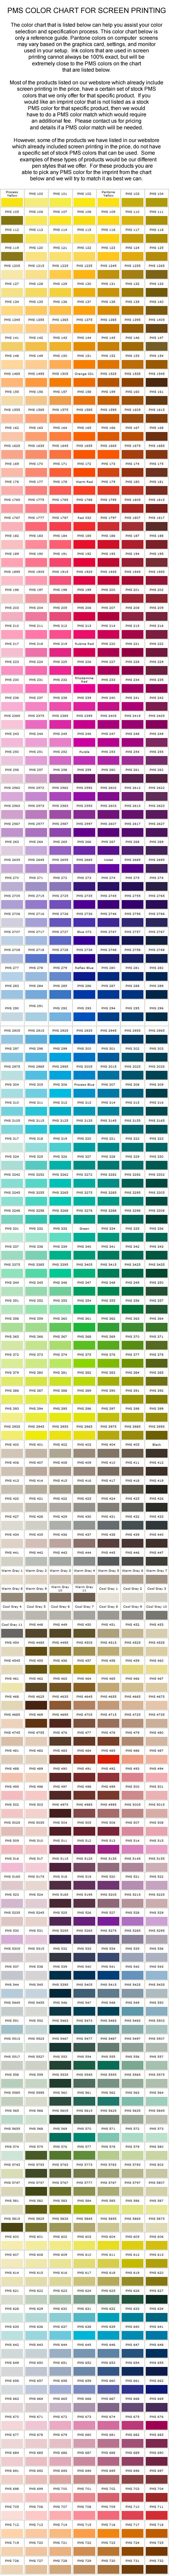 PMS Color Chart For Screen Printing